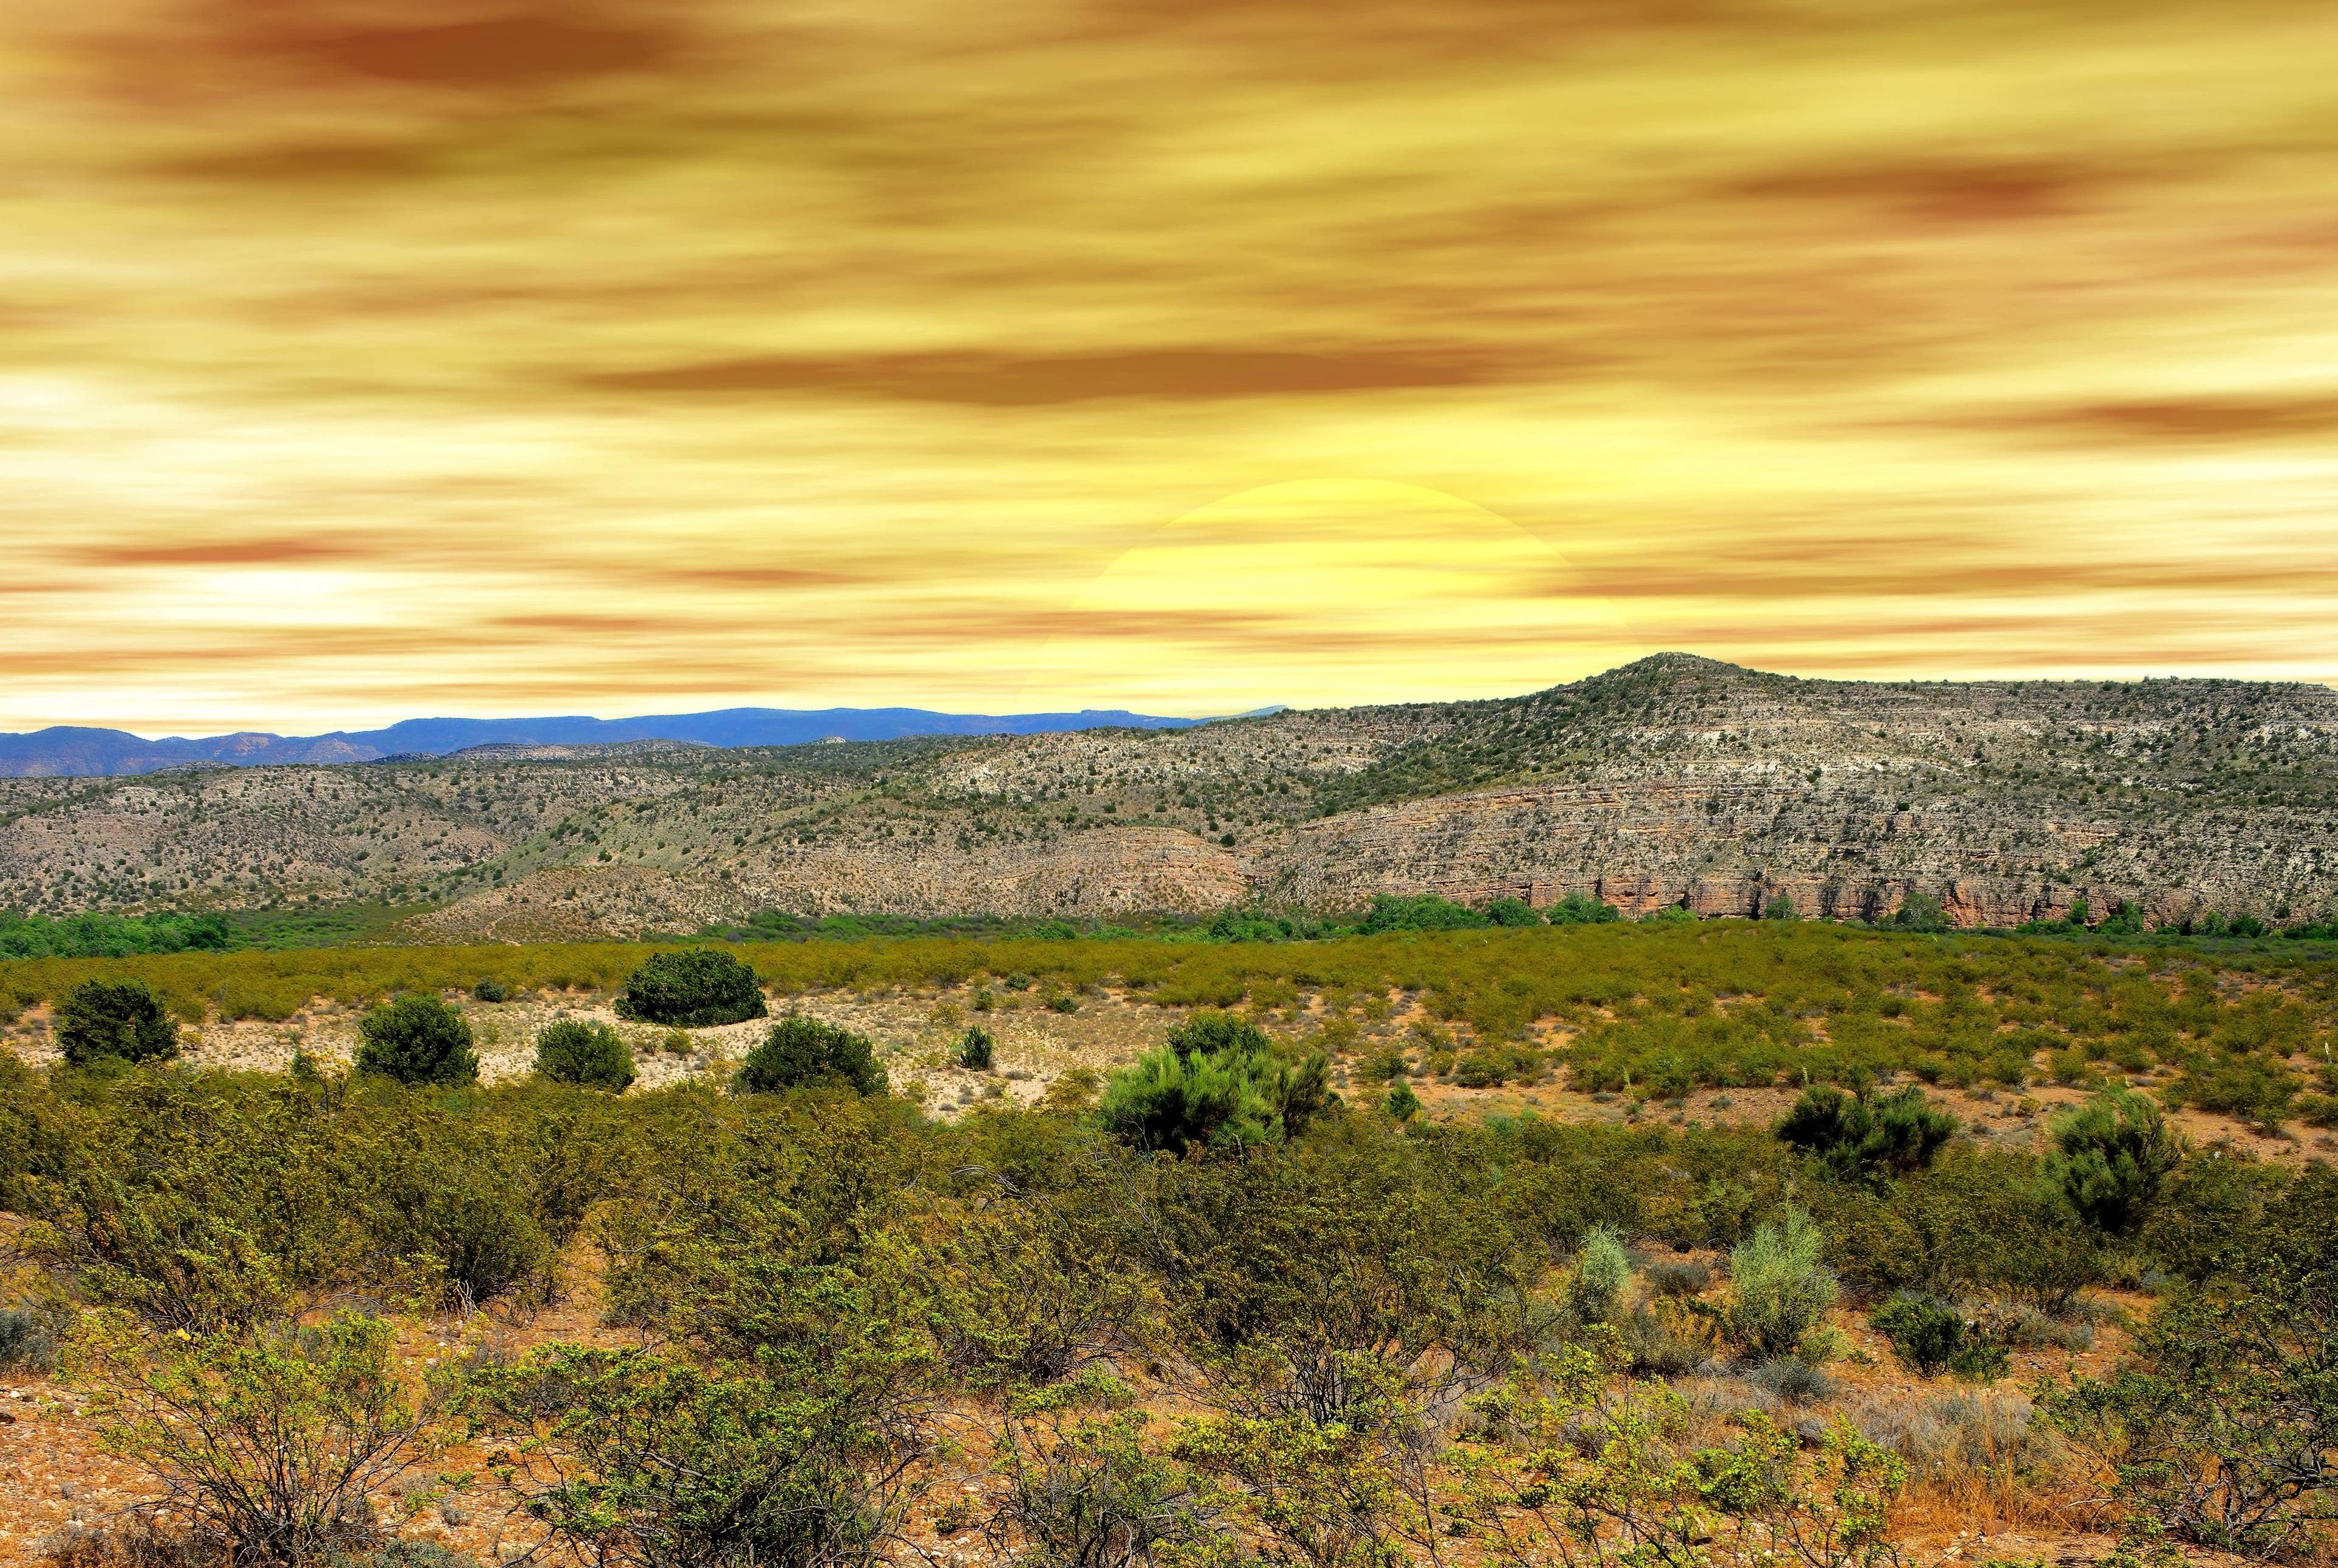 Water to Wine: Road Trip to Verde Valley